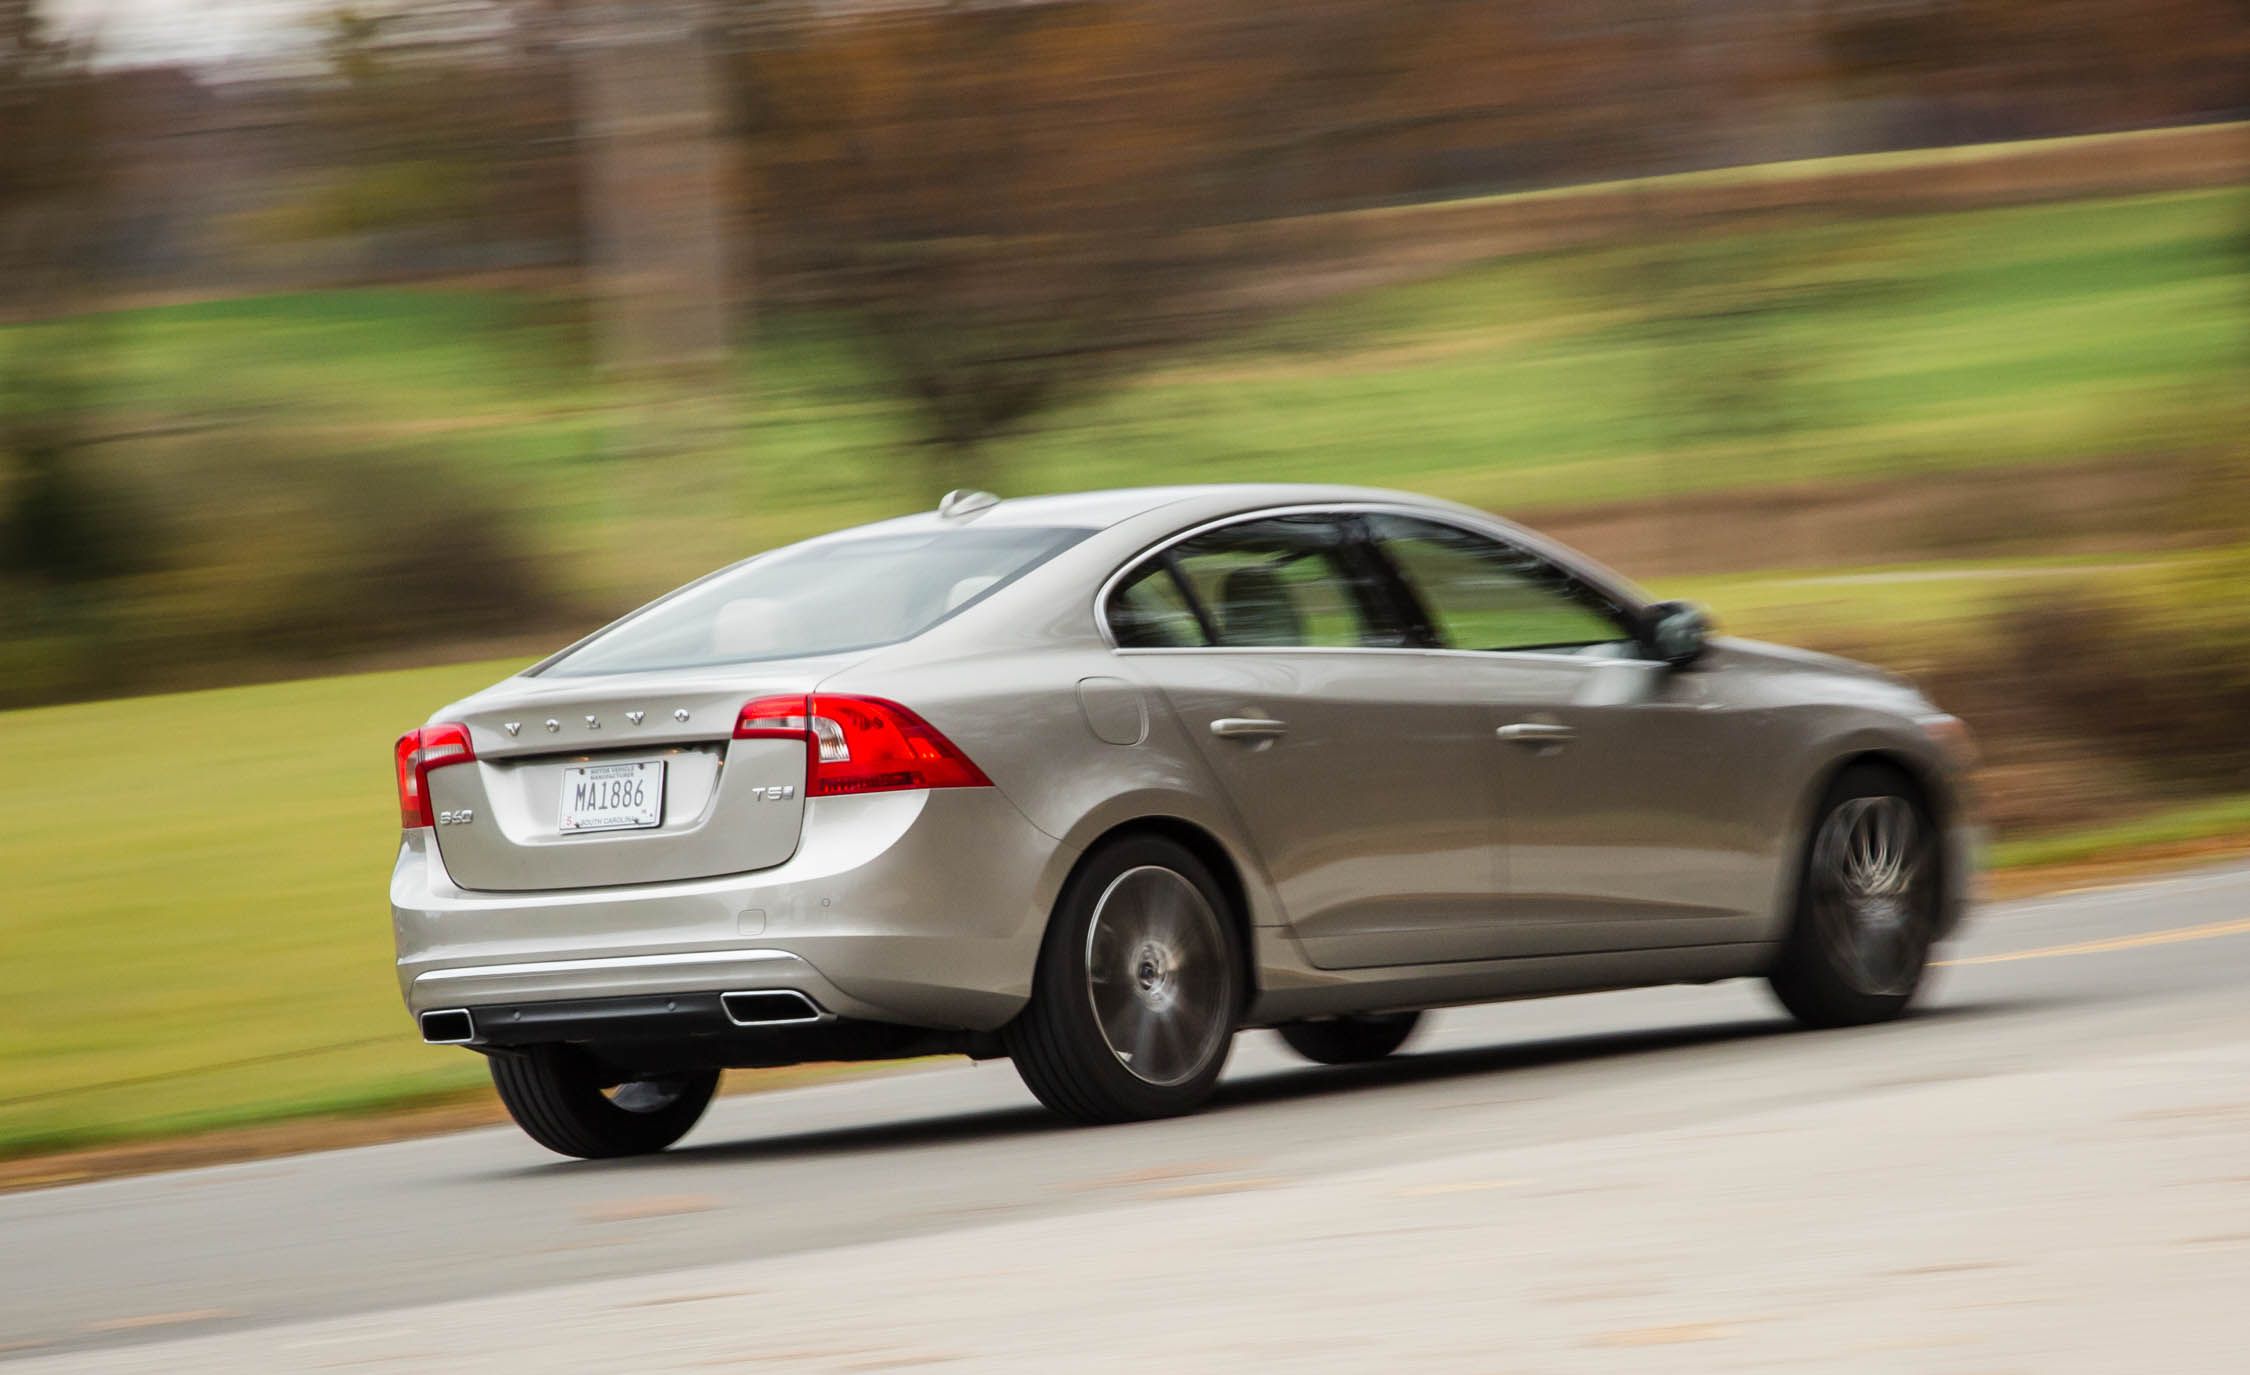 2016 Volvo S60 T5 Inscription Test Rear Side View (View 9 of 28)